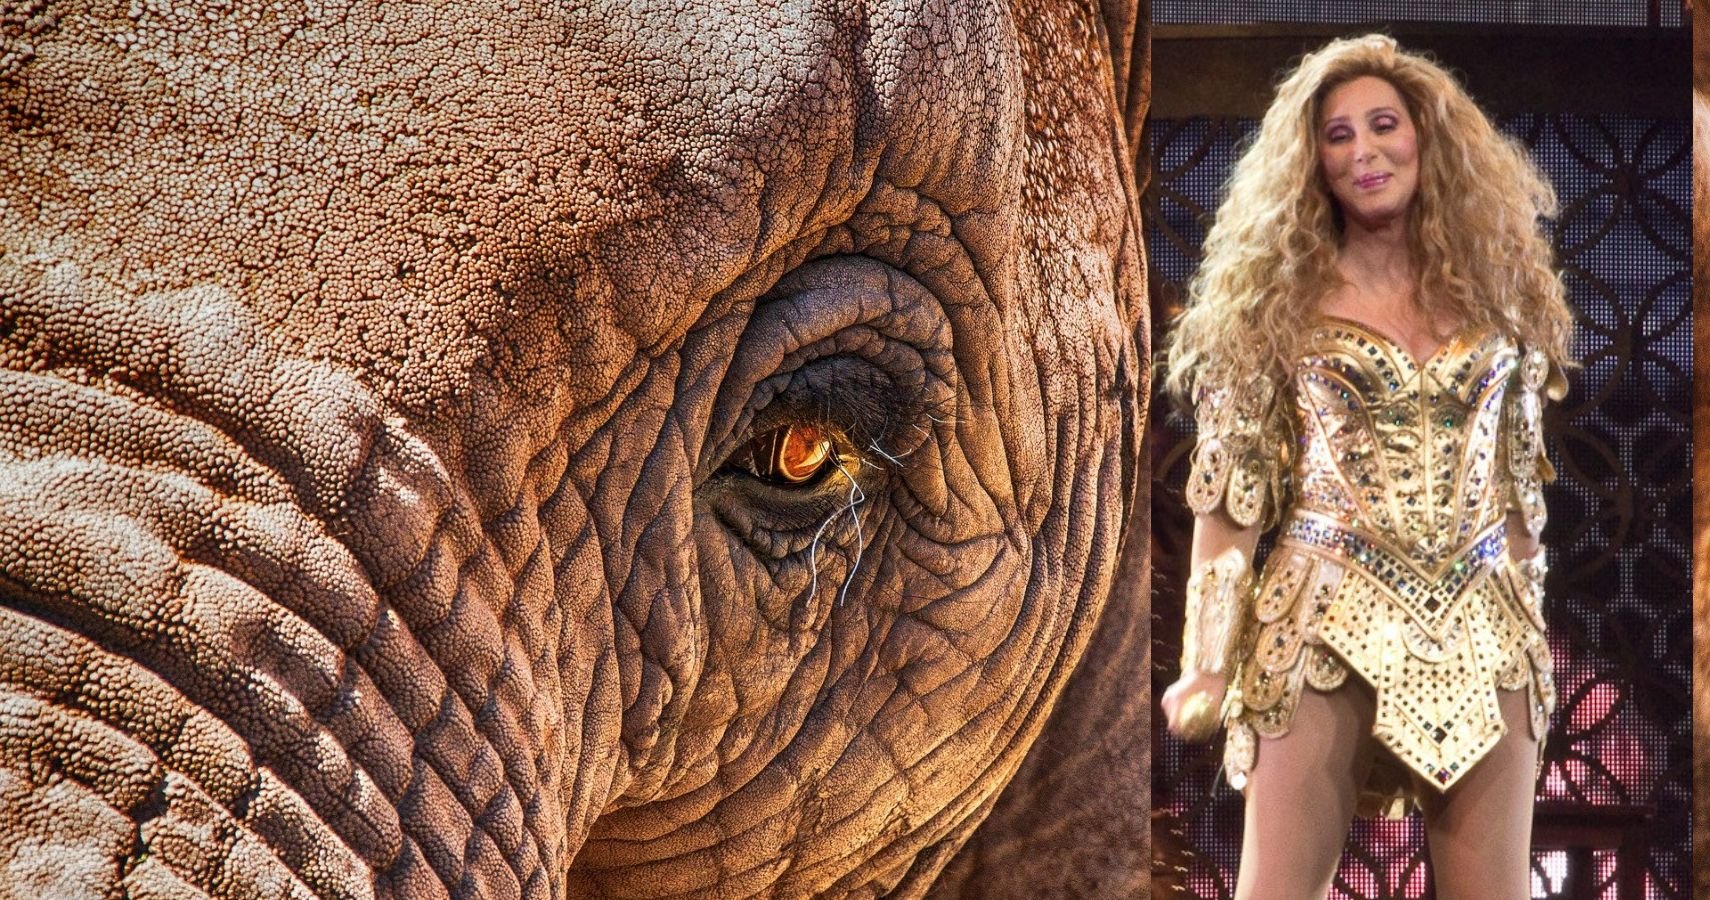 How Cher Used her Superstar Status to Rescue an Elephant